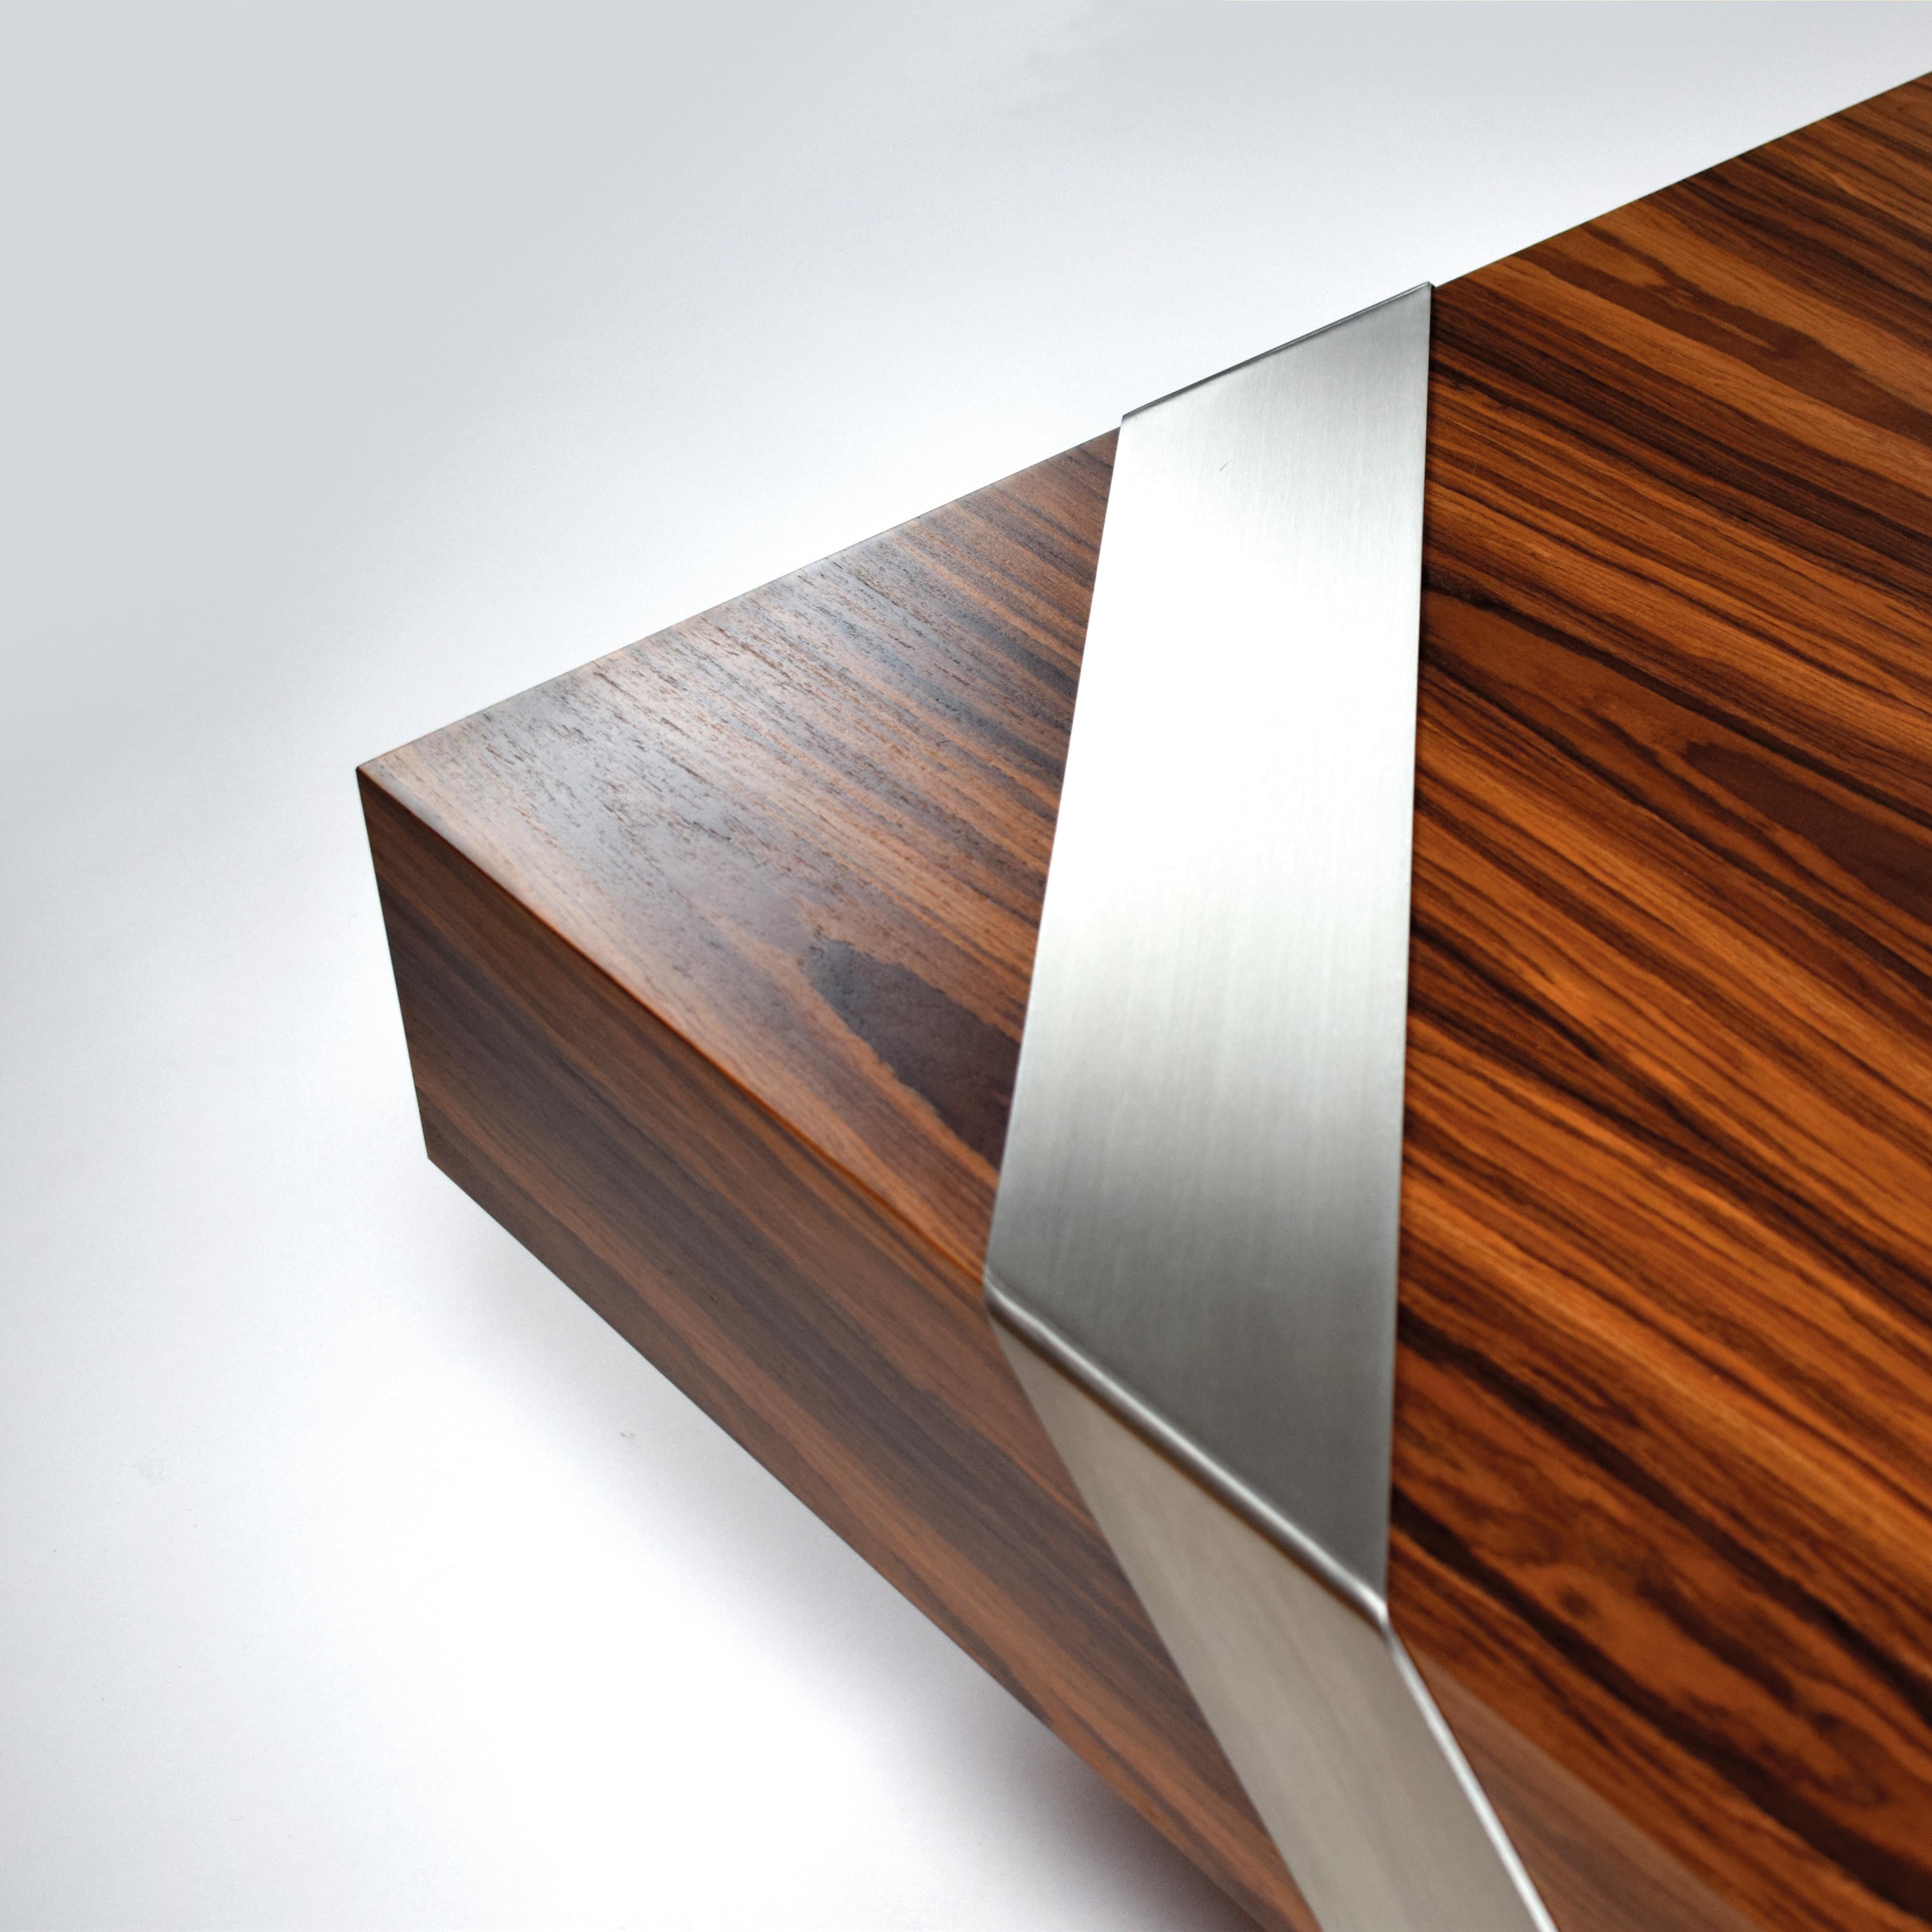 Hand-Crafted Modern Minimalist Square Center Coffee Table Ironwood Brushed Stainless Steel